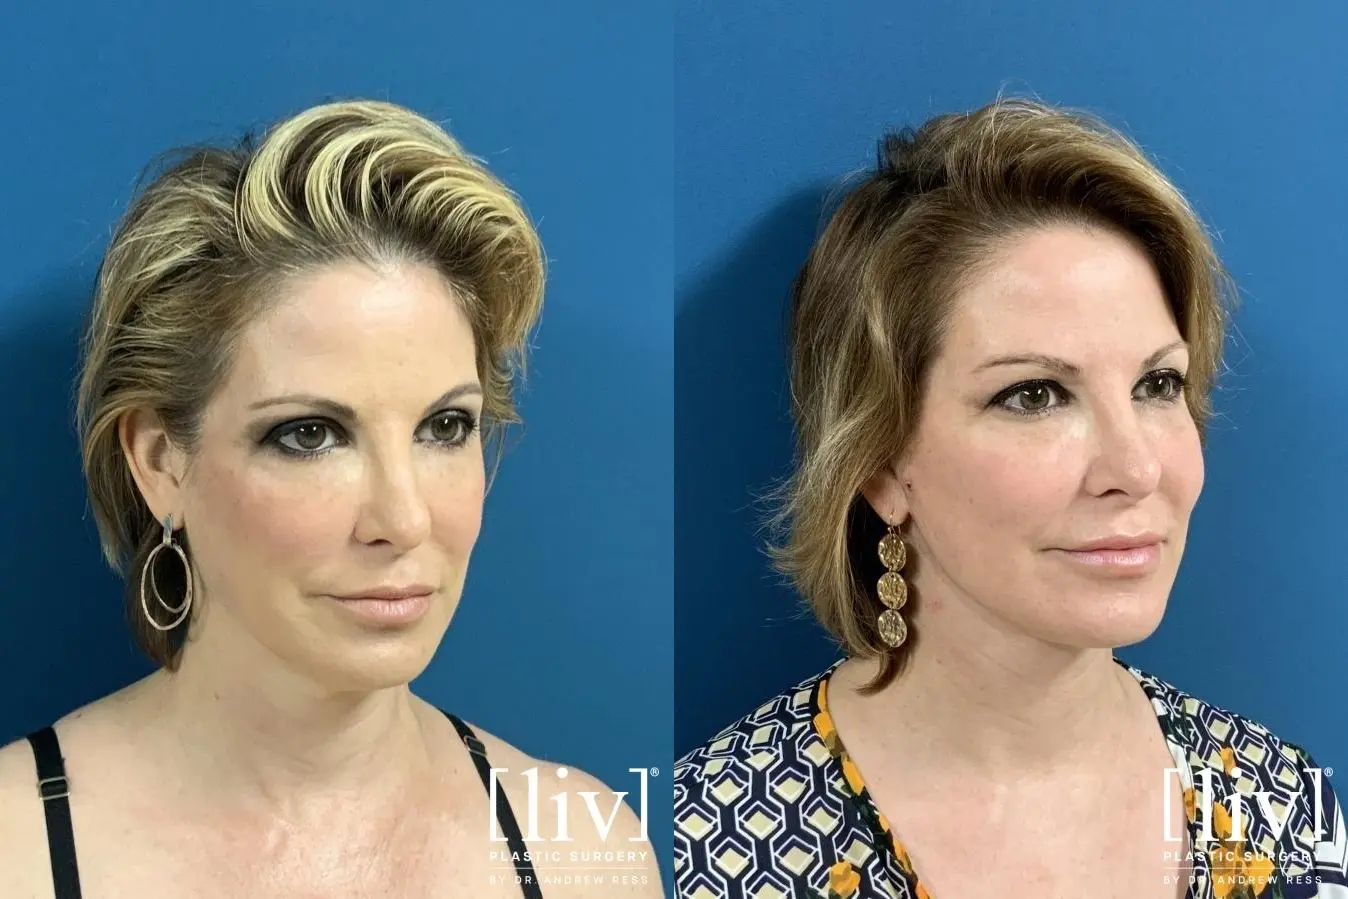 Facelift & Neck Lift: Patient 1 - Before and After 4